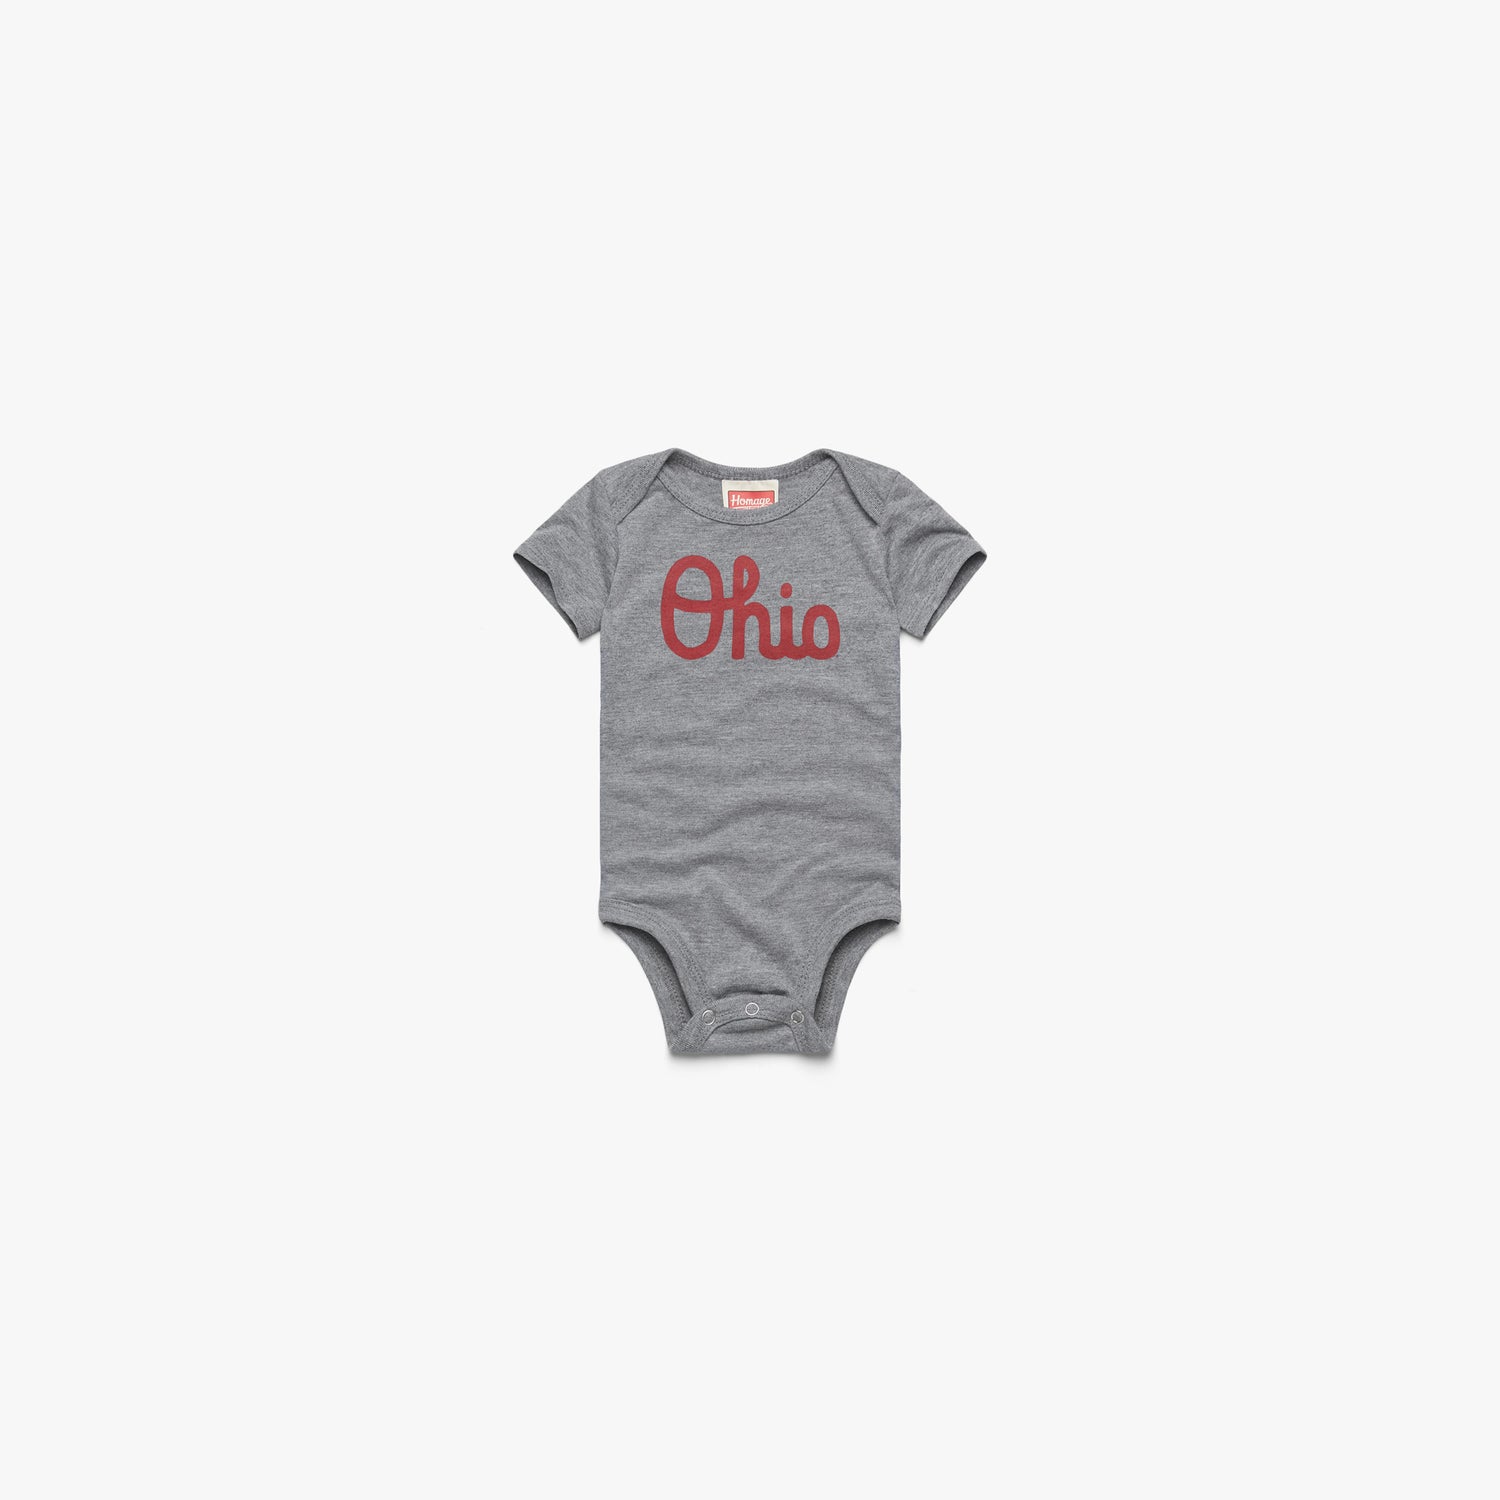 Script Ohio Baby One Piece from Homage. | Grey/Black Ink | Vintage Apparel from Homage.